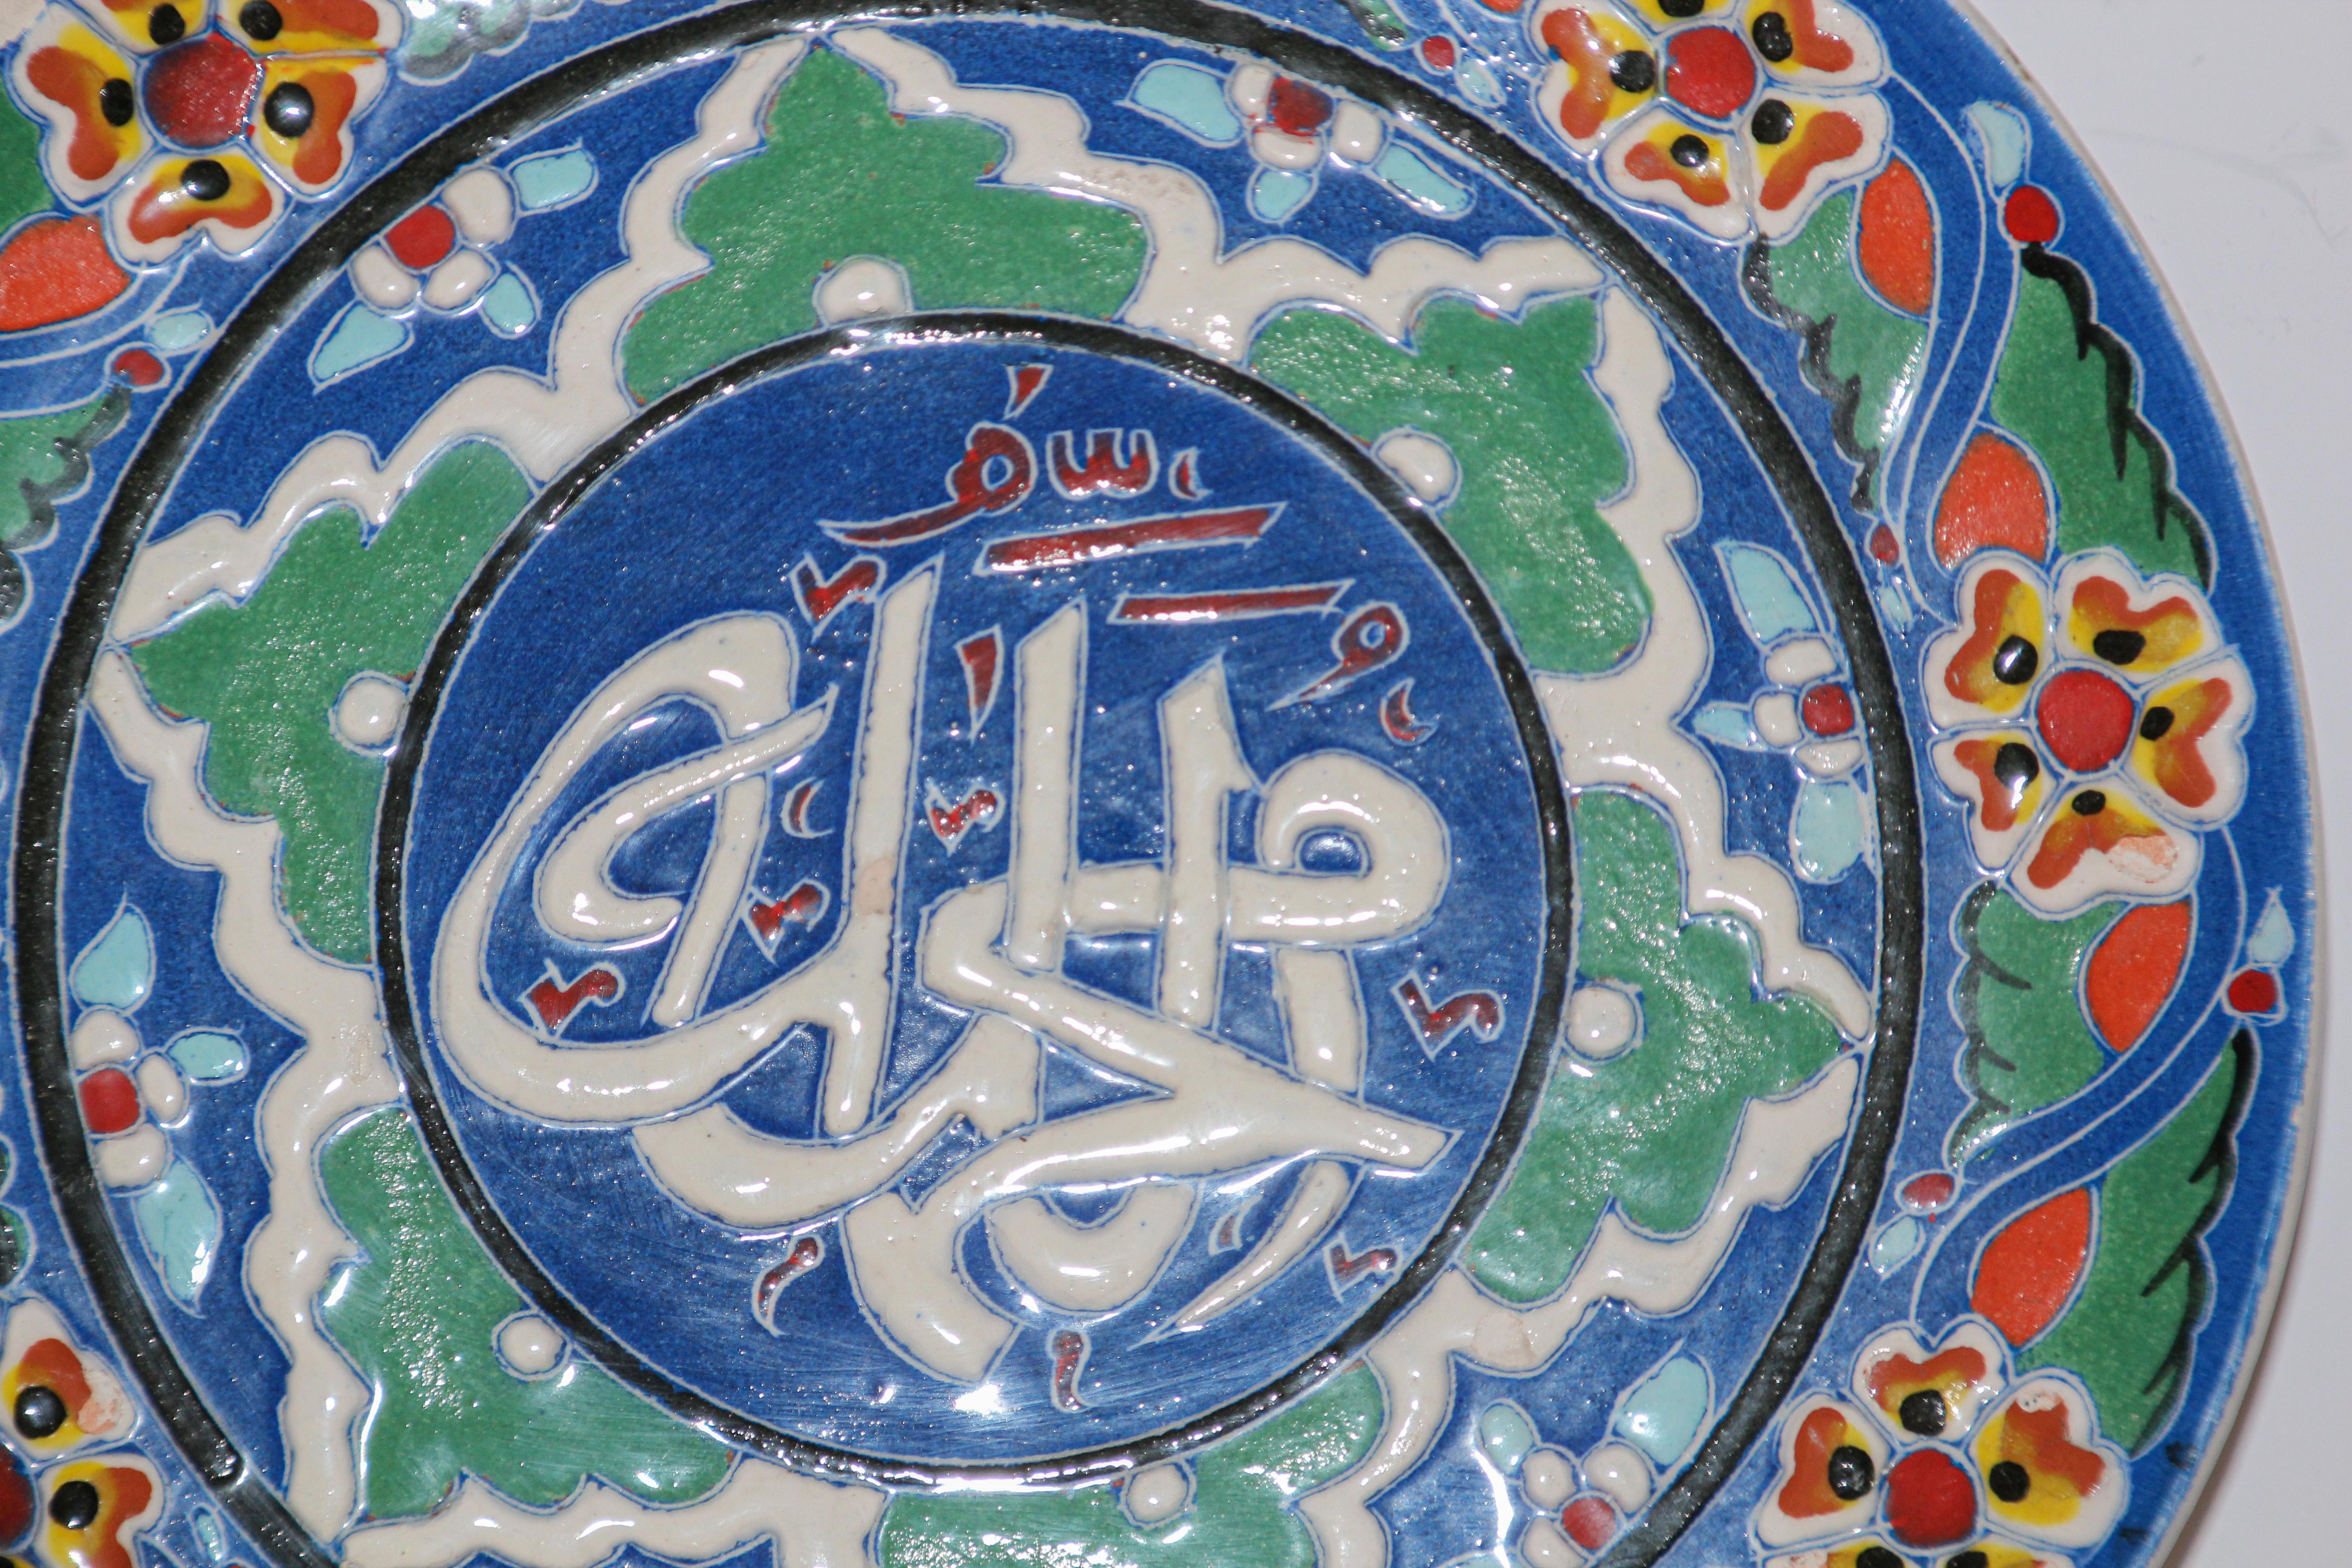 Hand painted and handcrafted Turkish ceramic wall decorative plate with polychrome ottoman floral design and Islamic calligraphy writing in the center.
This is an intricately, hand painted plate that was made in Turkey.
Turkey is famous for its kiln